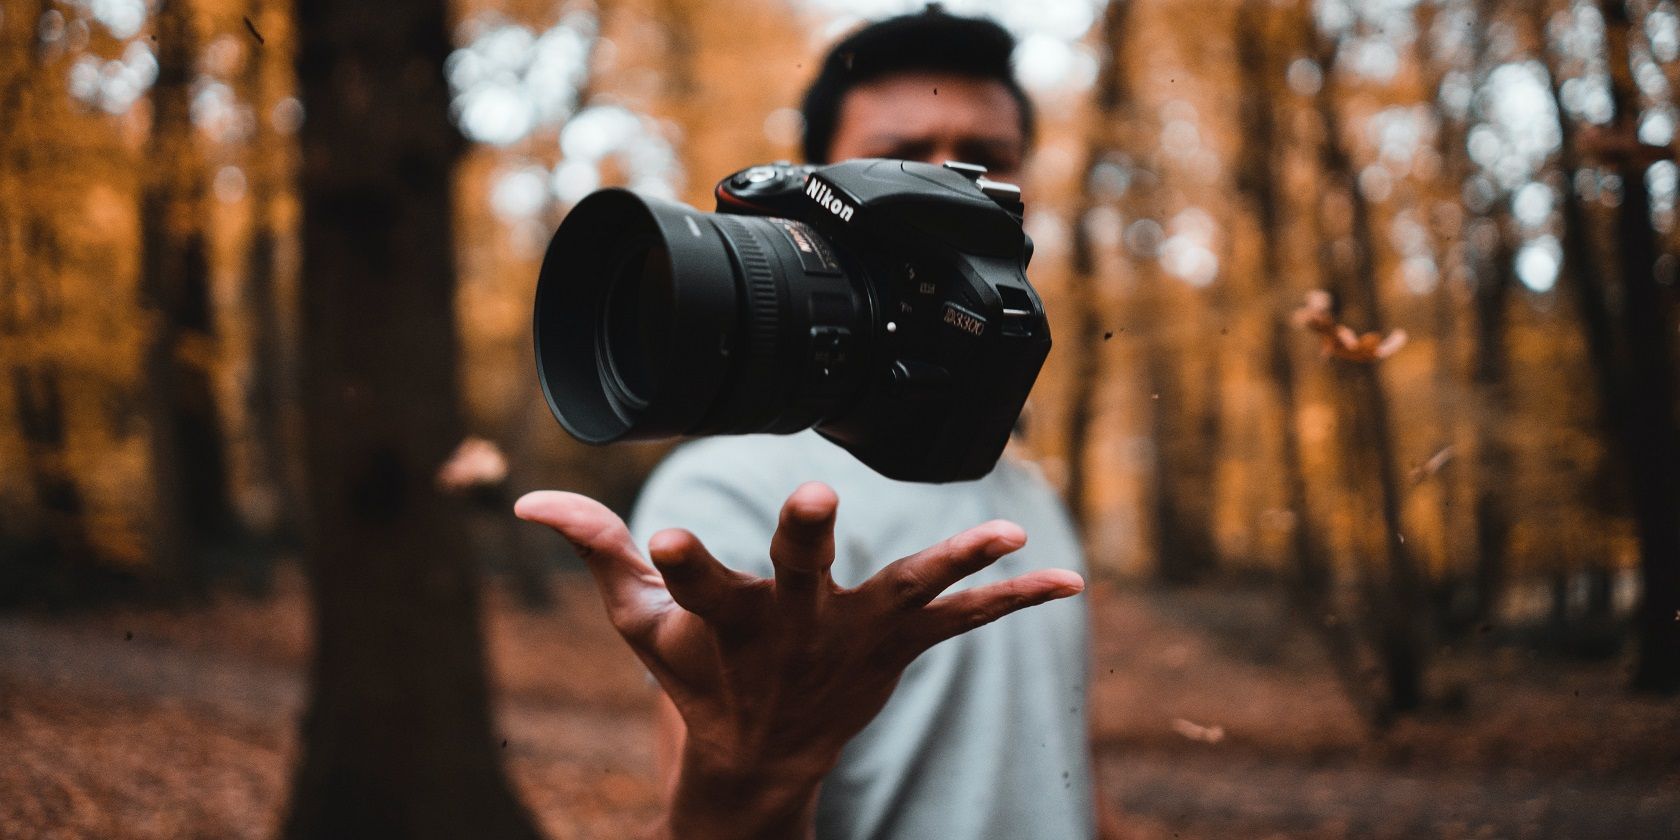 A man tossing a Nikon camera up in a forest